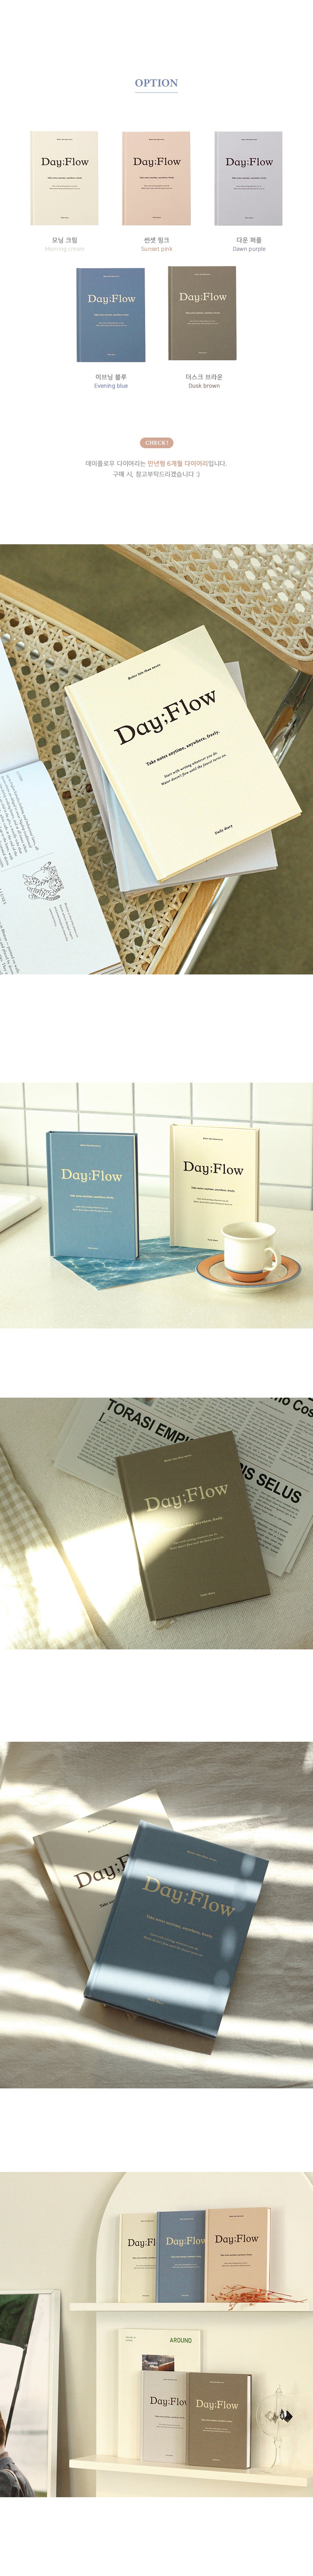 Day;Flow Daily Diary Dash and Dot 18 Planner, Journal, Diary Hunter & The Scholar